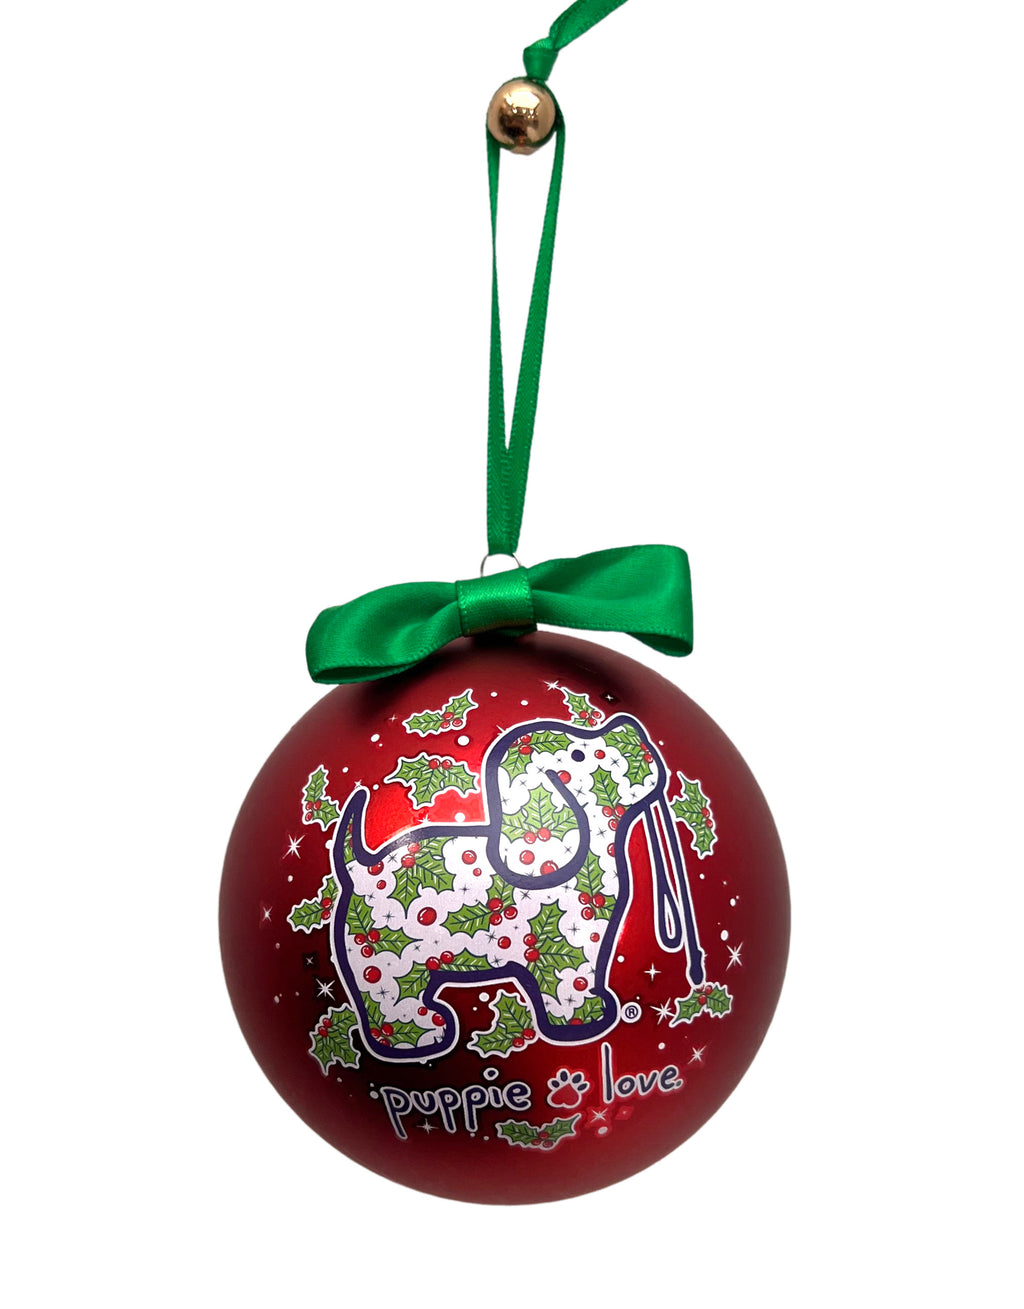 HOLLY BERRIES ORNAMENT - Puppie Love